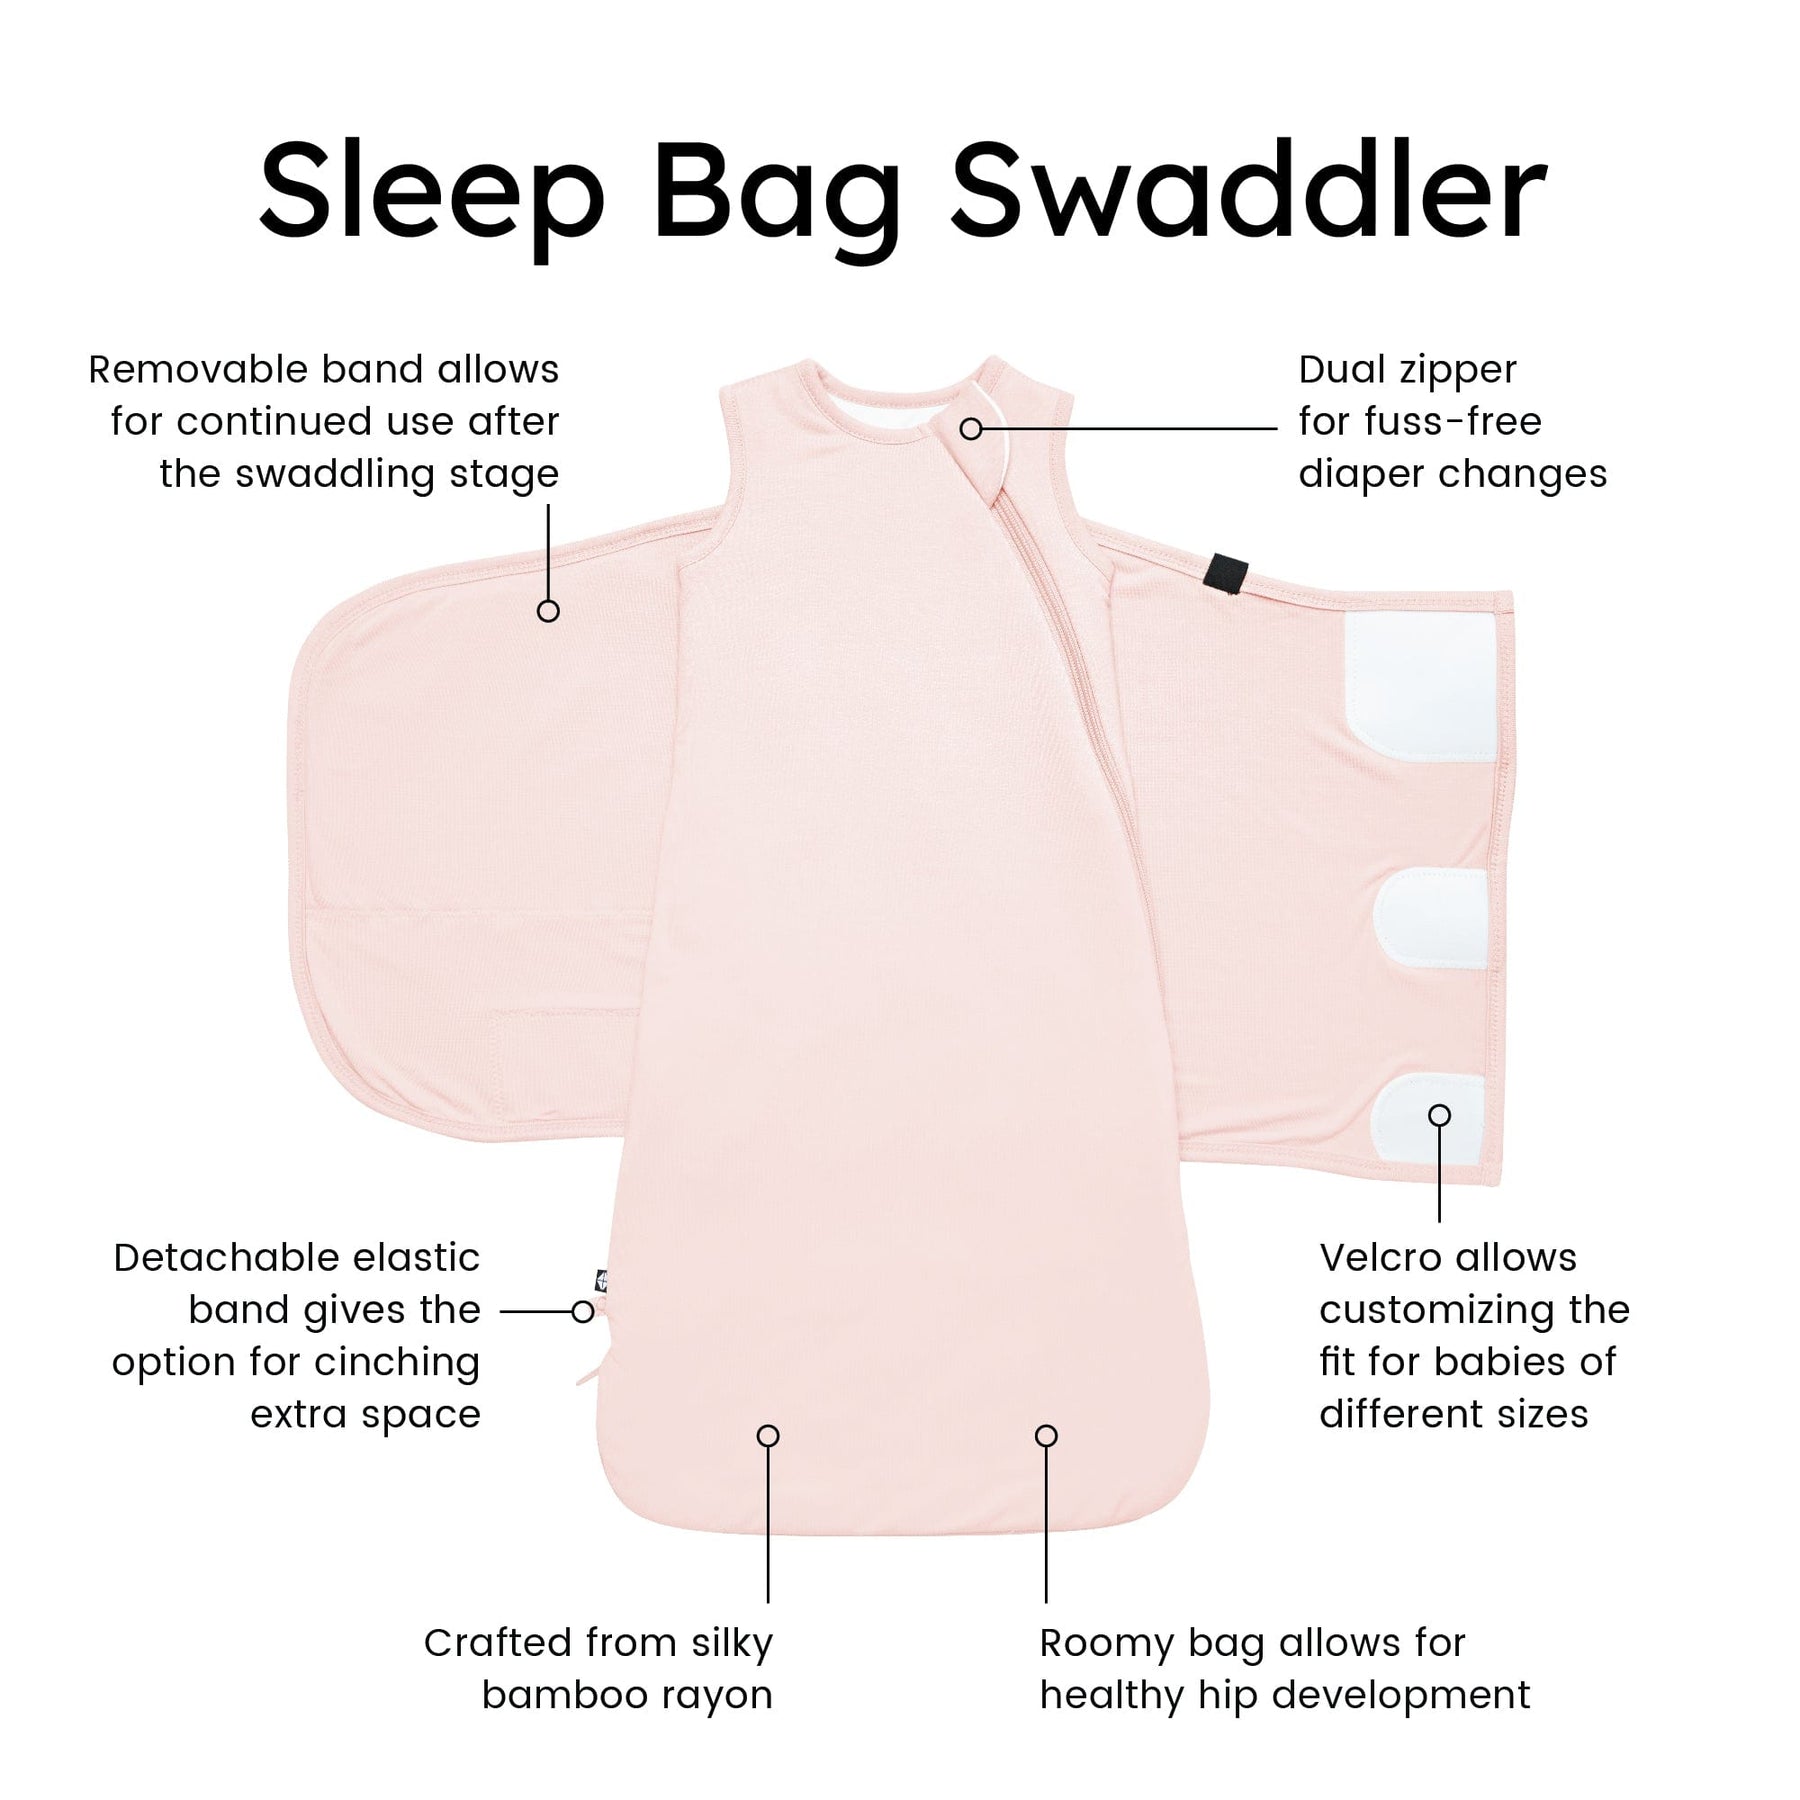 Kyte Baby Sleep Bag Swaddler in Blush with benefits listed